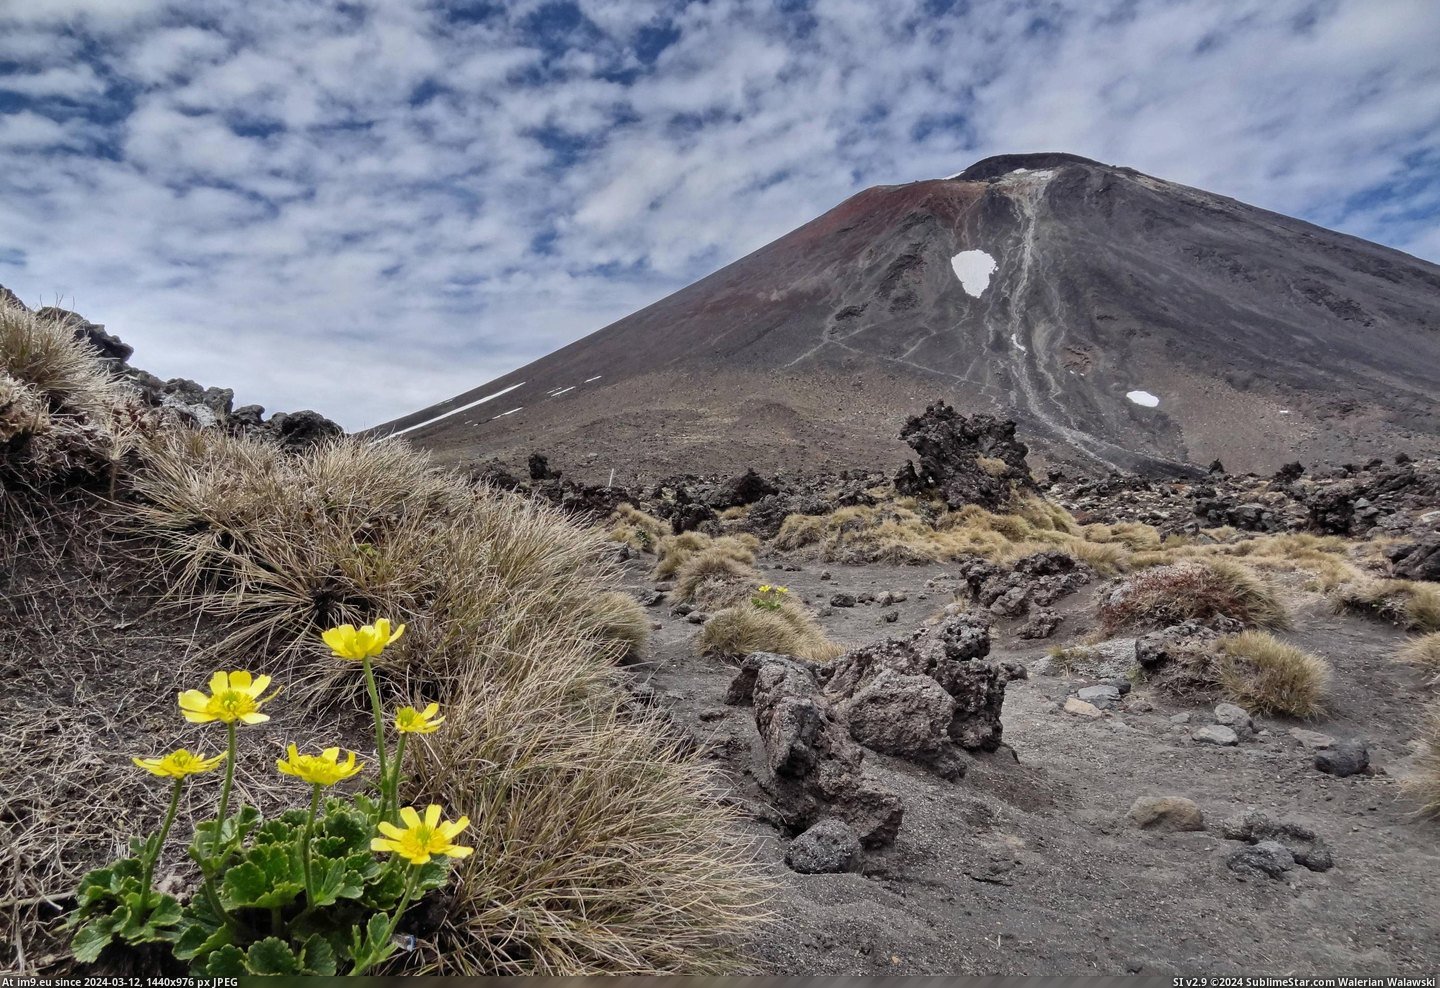 #Aka #Mount #Zealand #Rings #Volcanic #Doom #Flowers #Base #Lord [Earthporn] Flowers at the base of volcanic Mount Ngauruhoe, New Zealand (AKA 'Mount Doom' from Lord of the Rings)  [4608x3144] Pic. (Image of album My r/EARTHPORN favs))